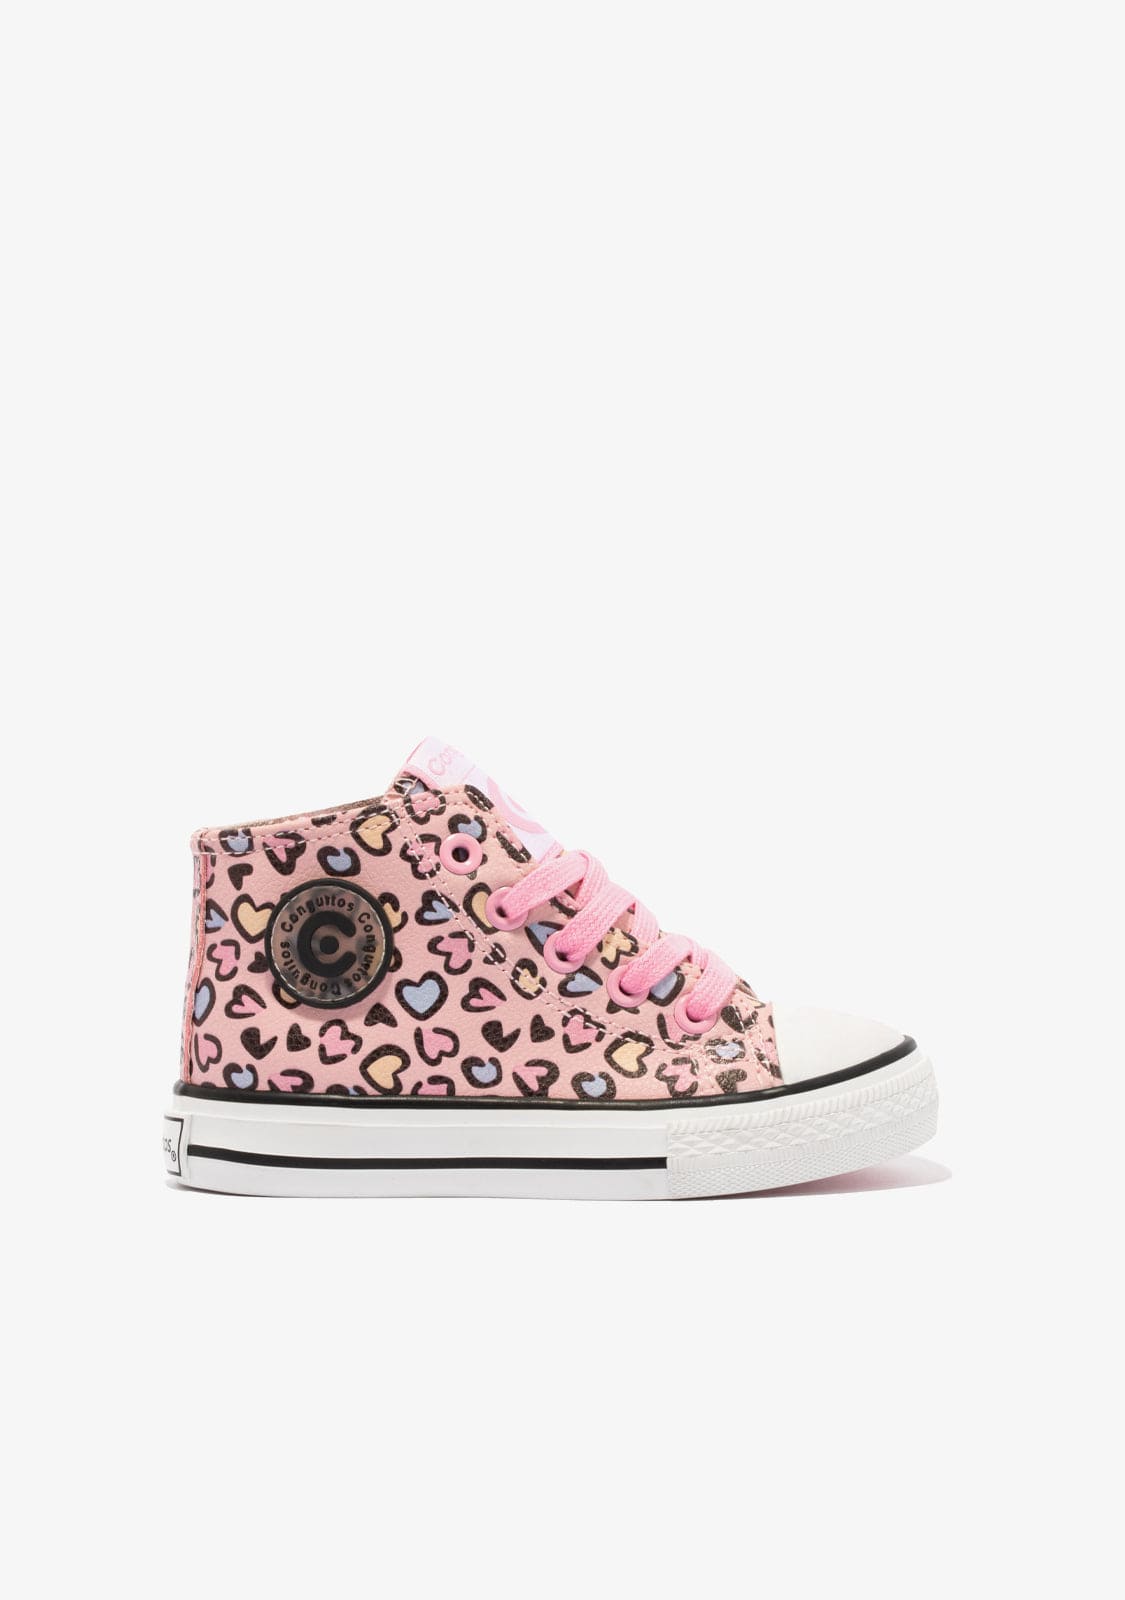 CONGUITOS Shoes Girl's Pink Print Hearts Hi-Top Sneakers